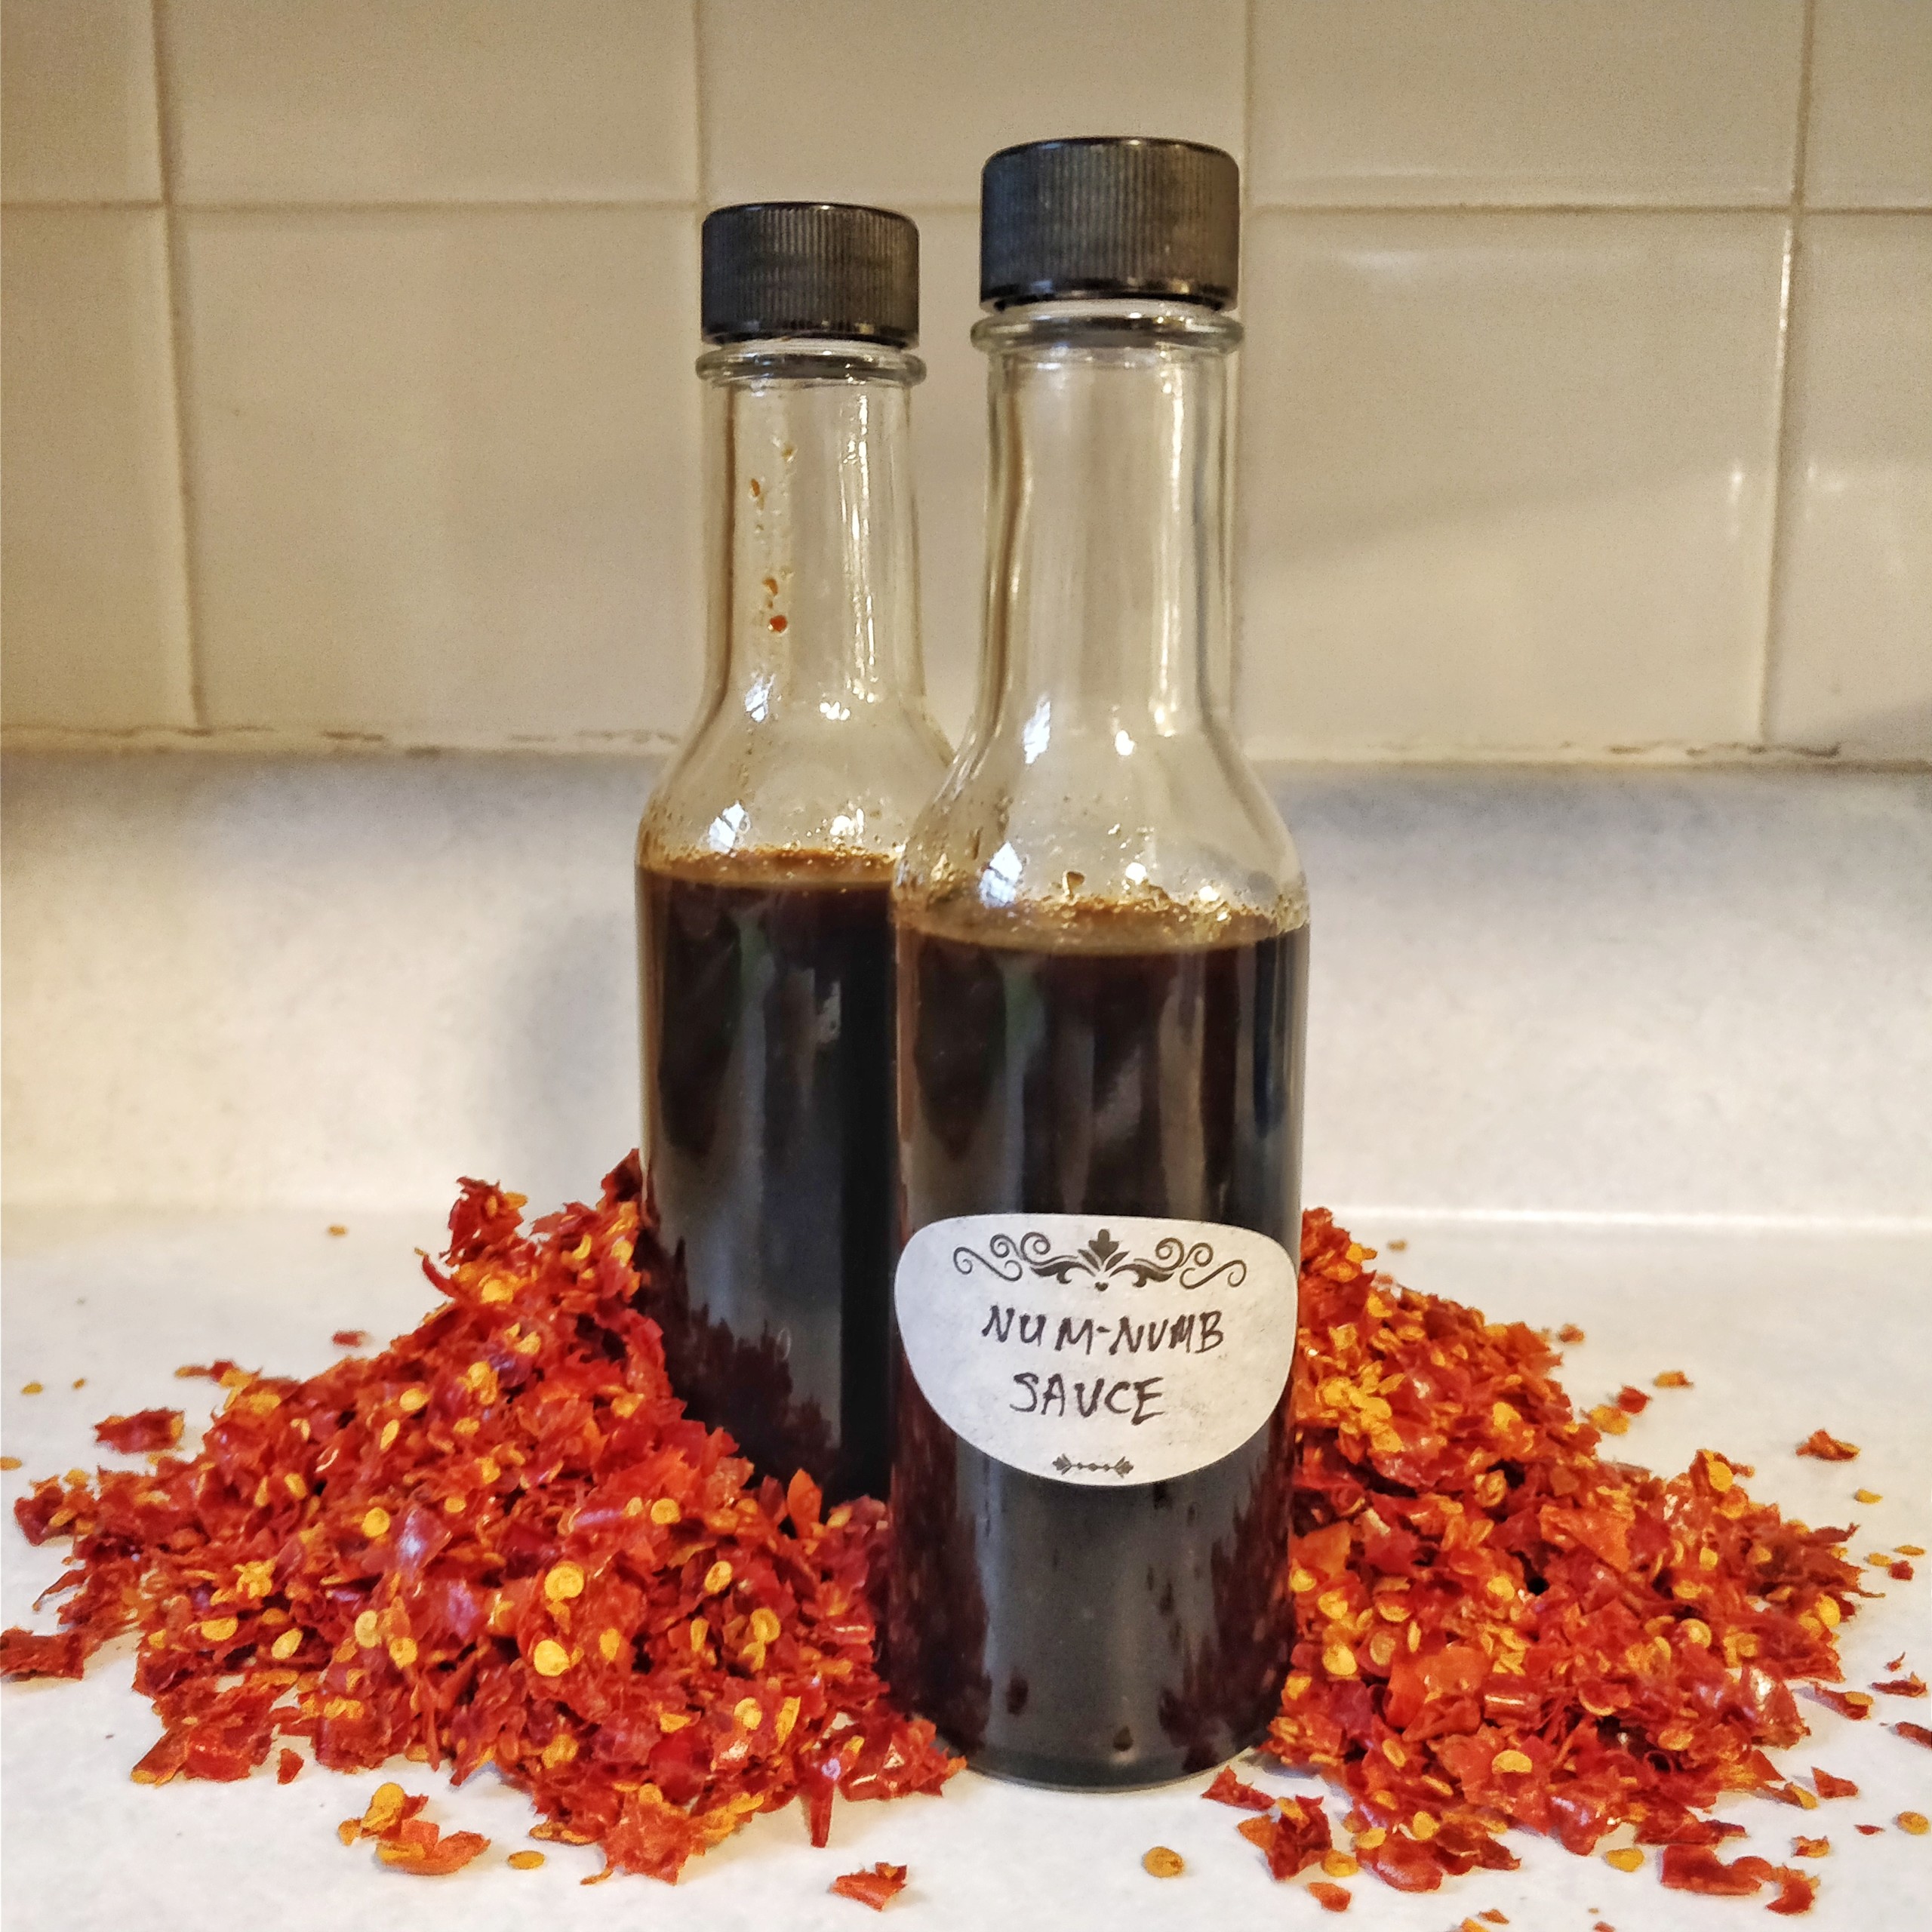 Two bottles of Num-Numb Sauce enveloped in a pile of chili flakes.